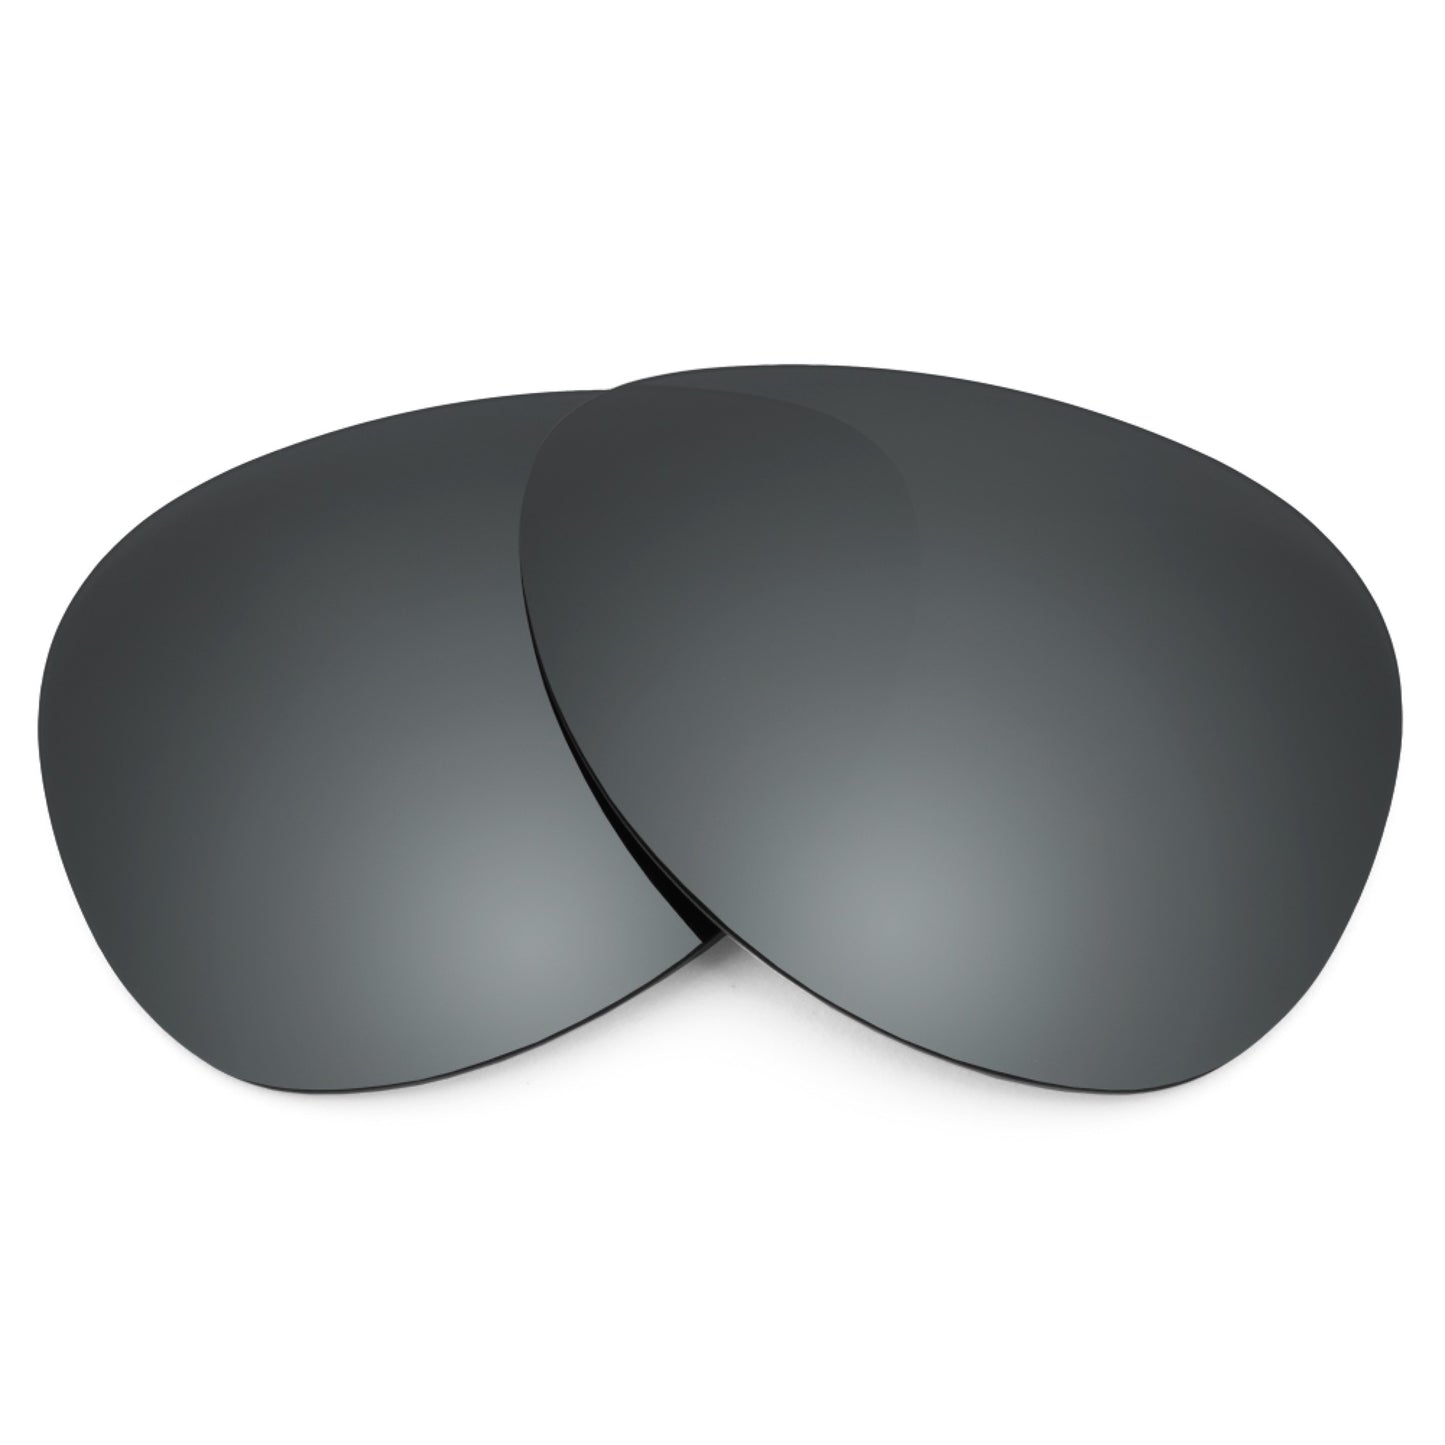 Revant replacement lenses for Ray-Ban RB8301 59mm Non-Polarized Black Chrome